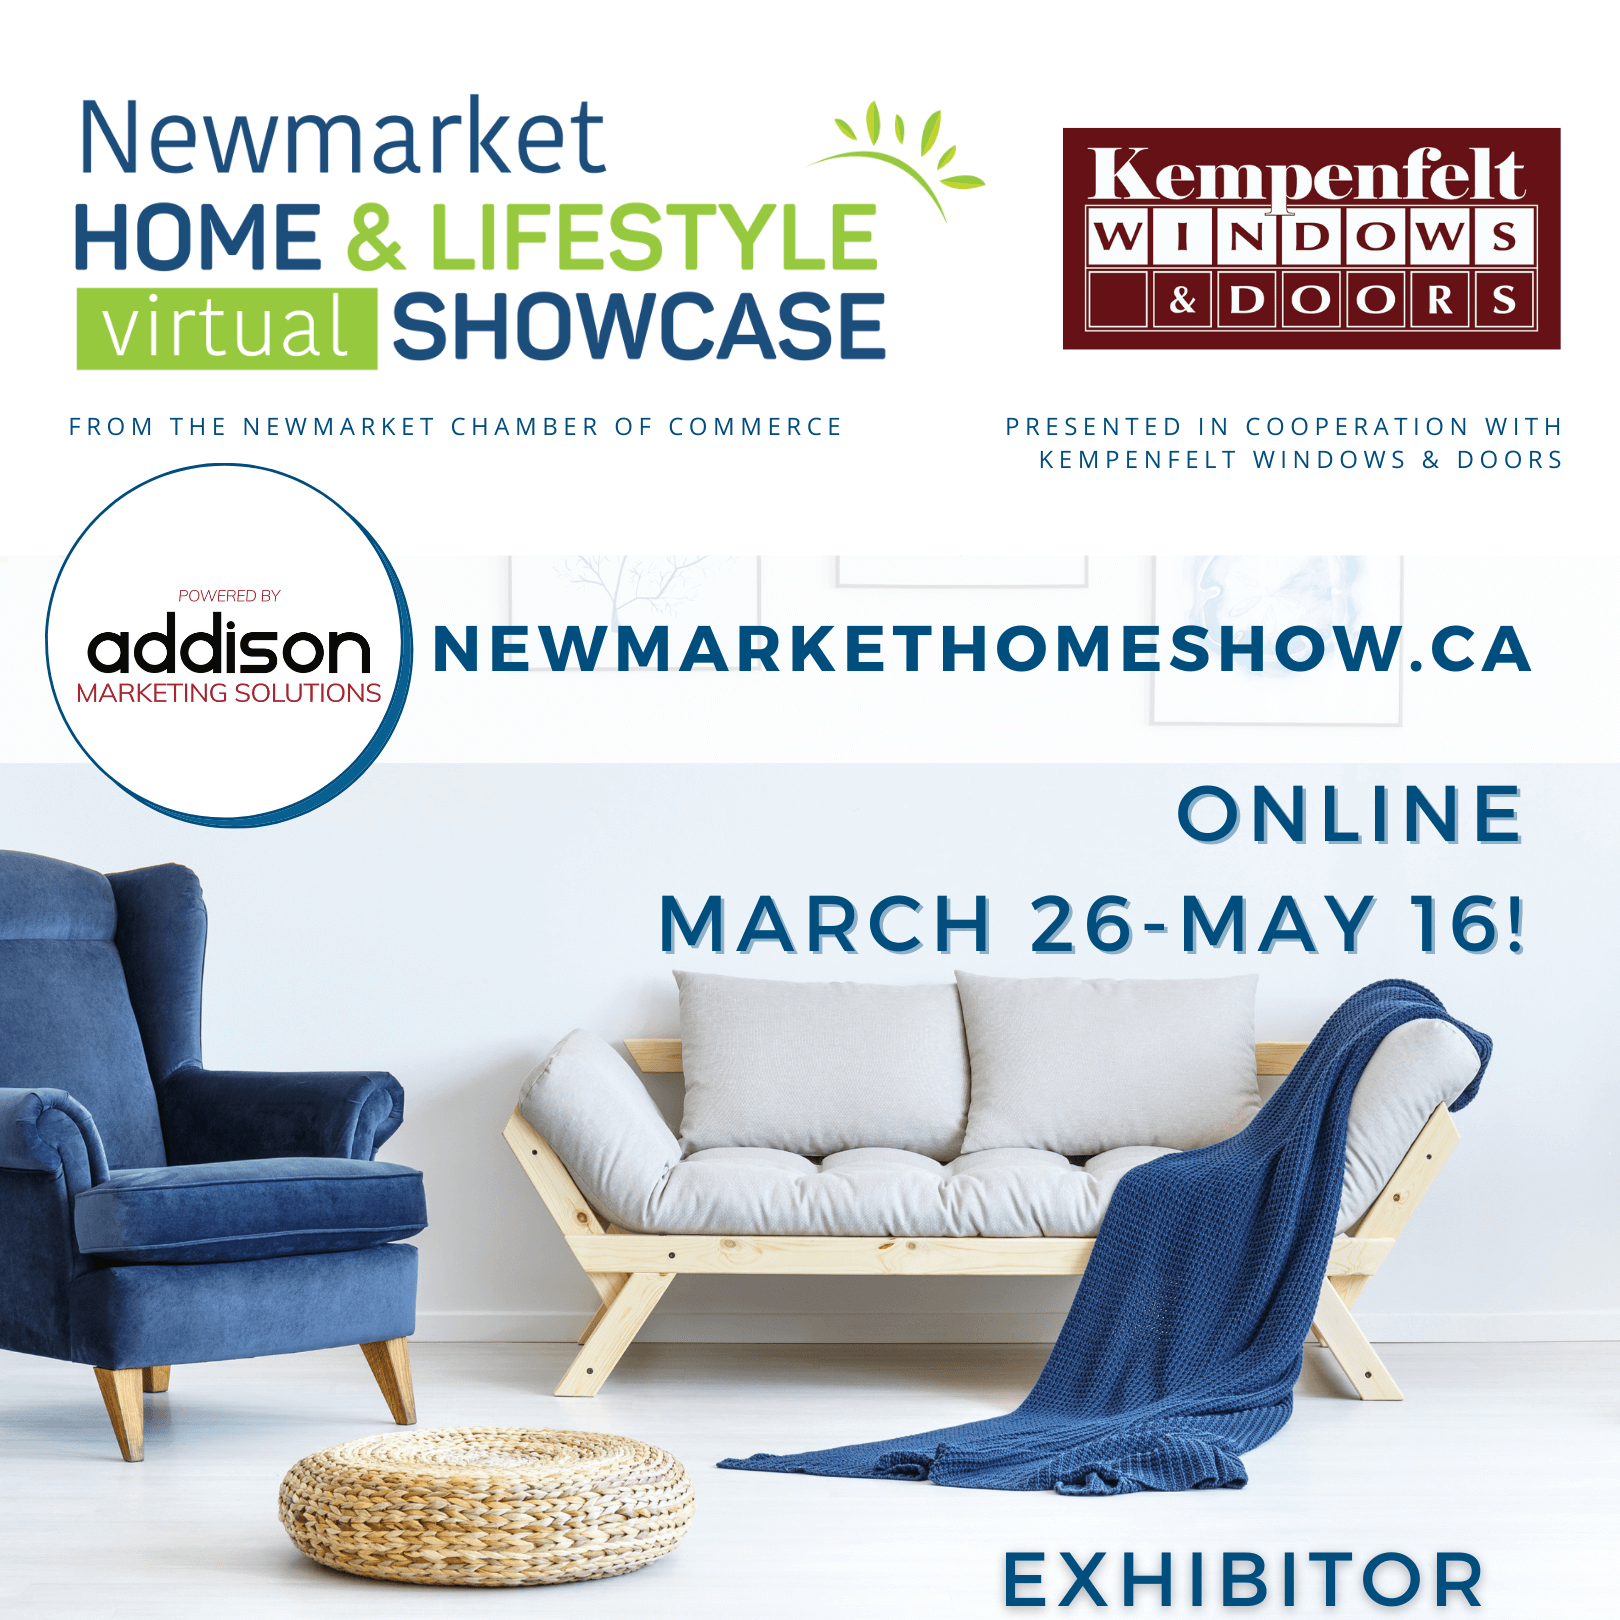 Find Kempenfelt Windows and Doors at the Newmarket 2021 Home & Lifestyle Showcase.